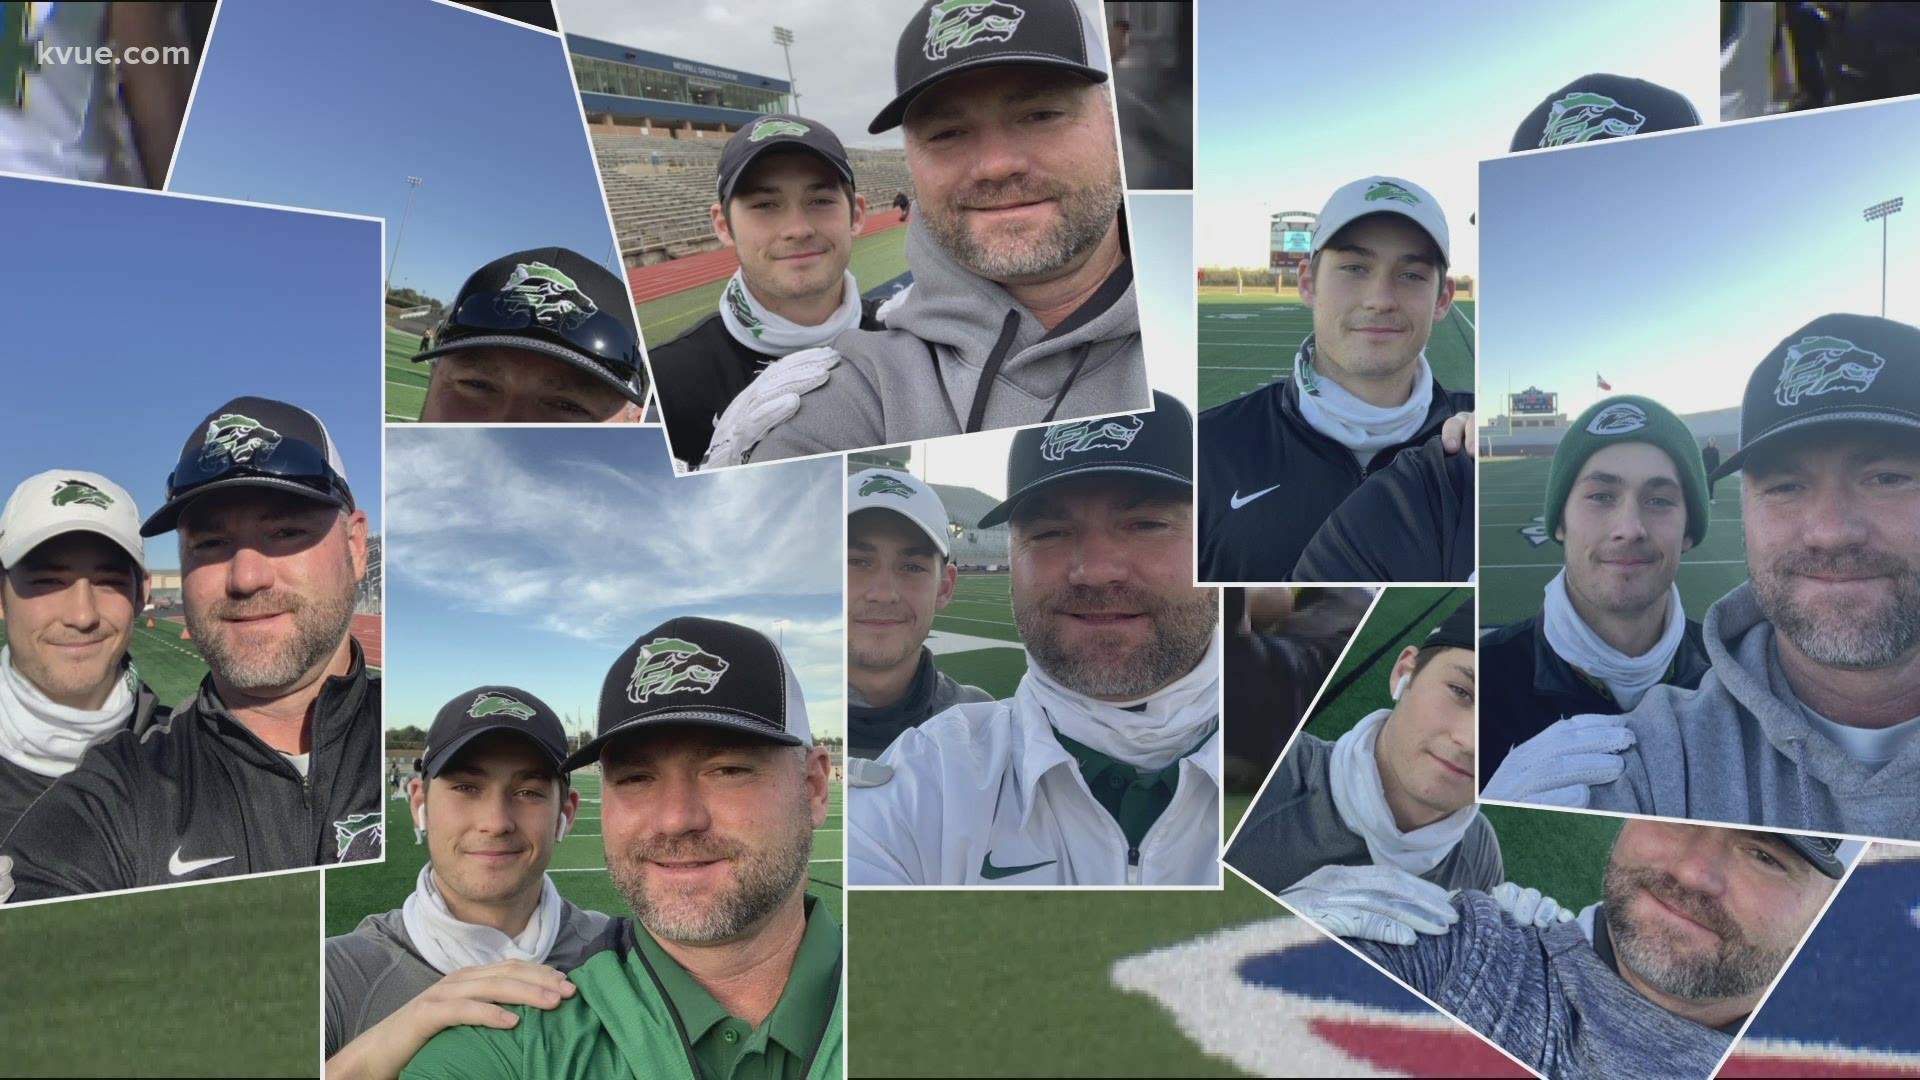 Most of the Cedar Park Timberwolves go all the way back to elementary school together. But for the head coach and one wide receiver, the bond goes back even further.